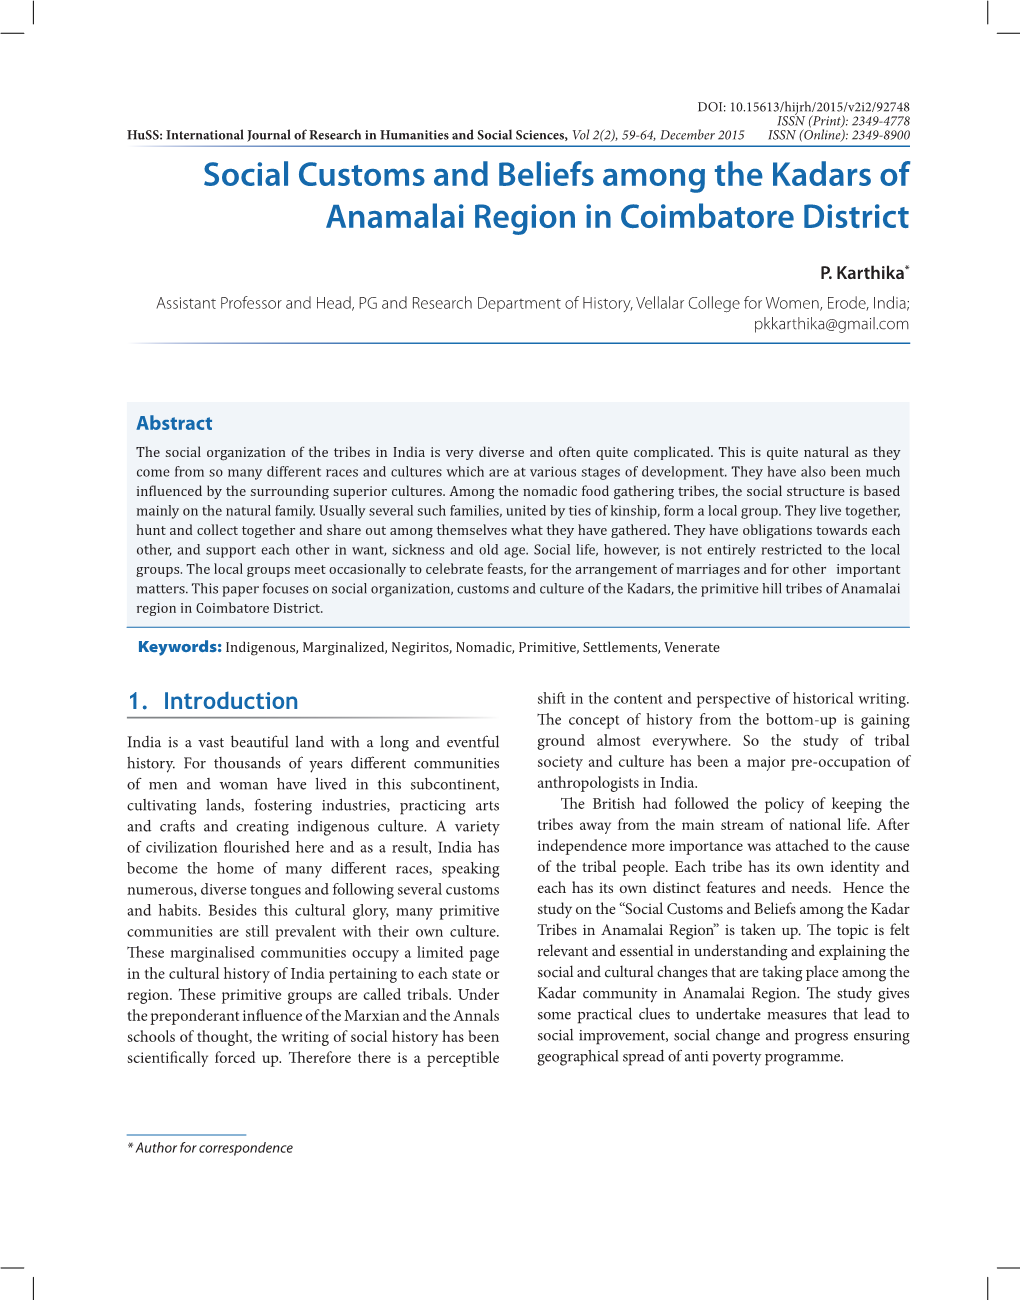 Social Customs and Beliefs Among the Kadars of Anamalai Region in Coimbatore District